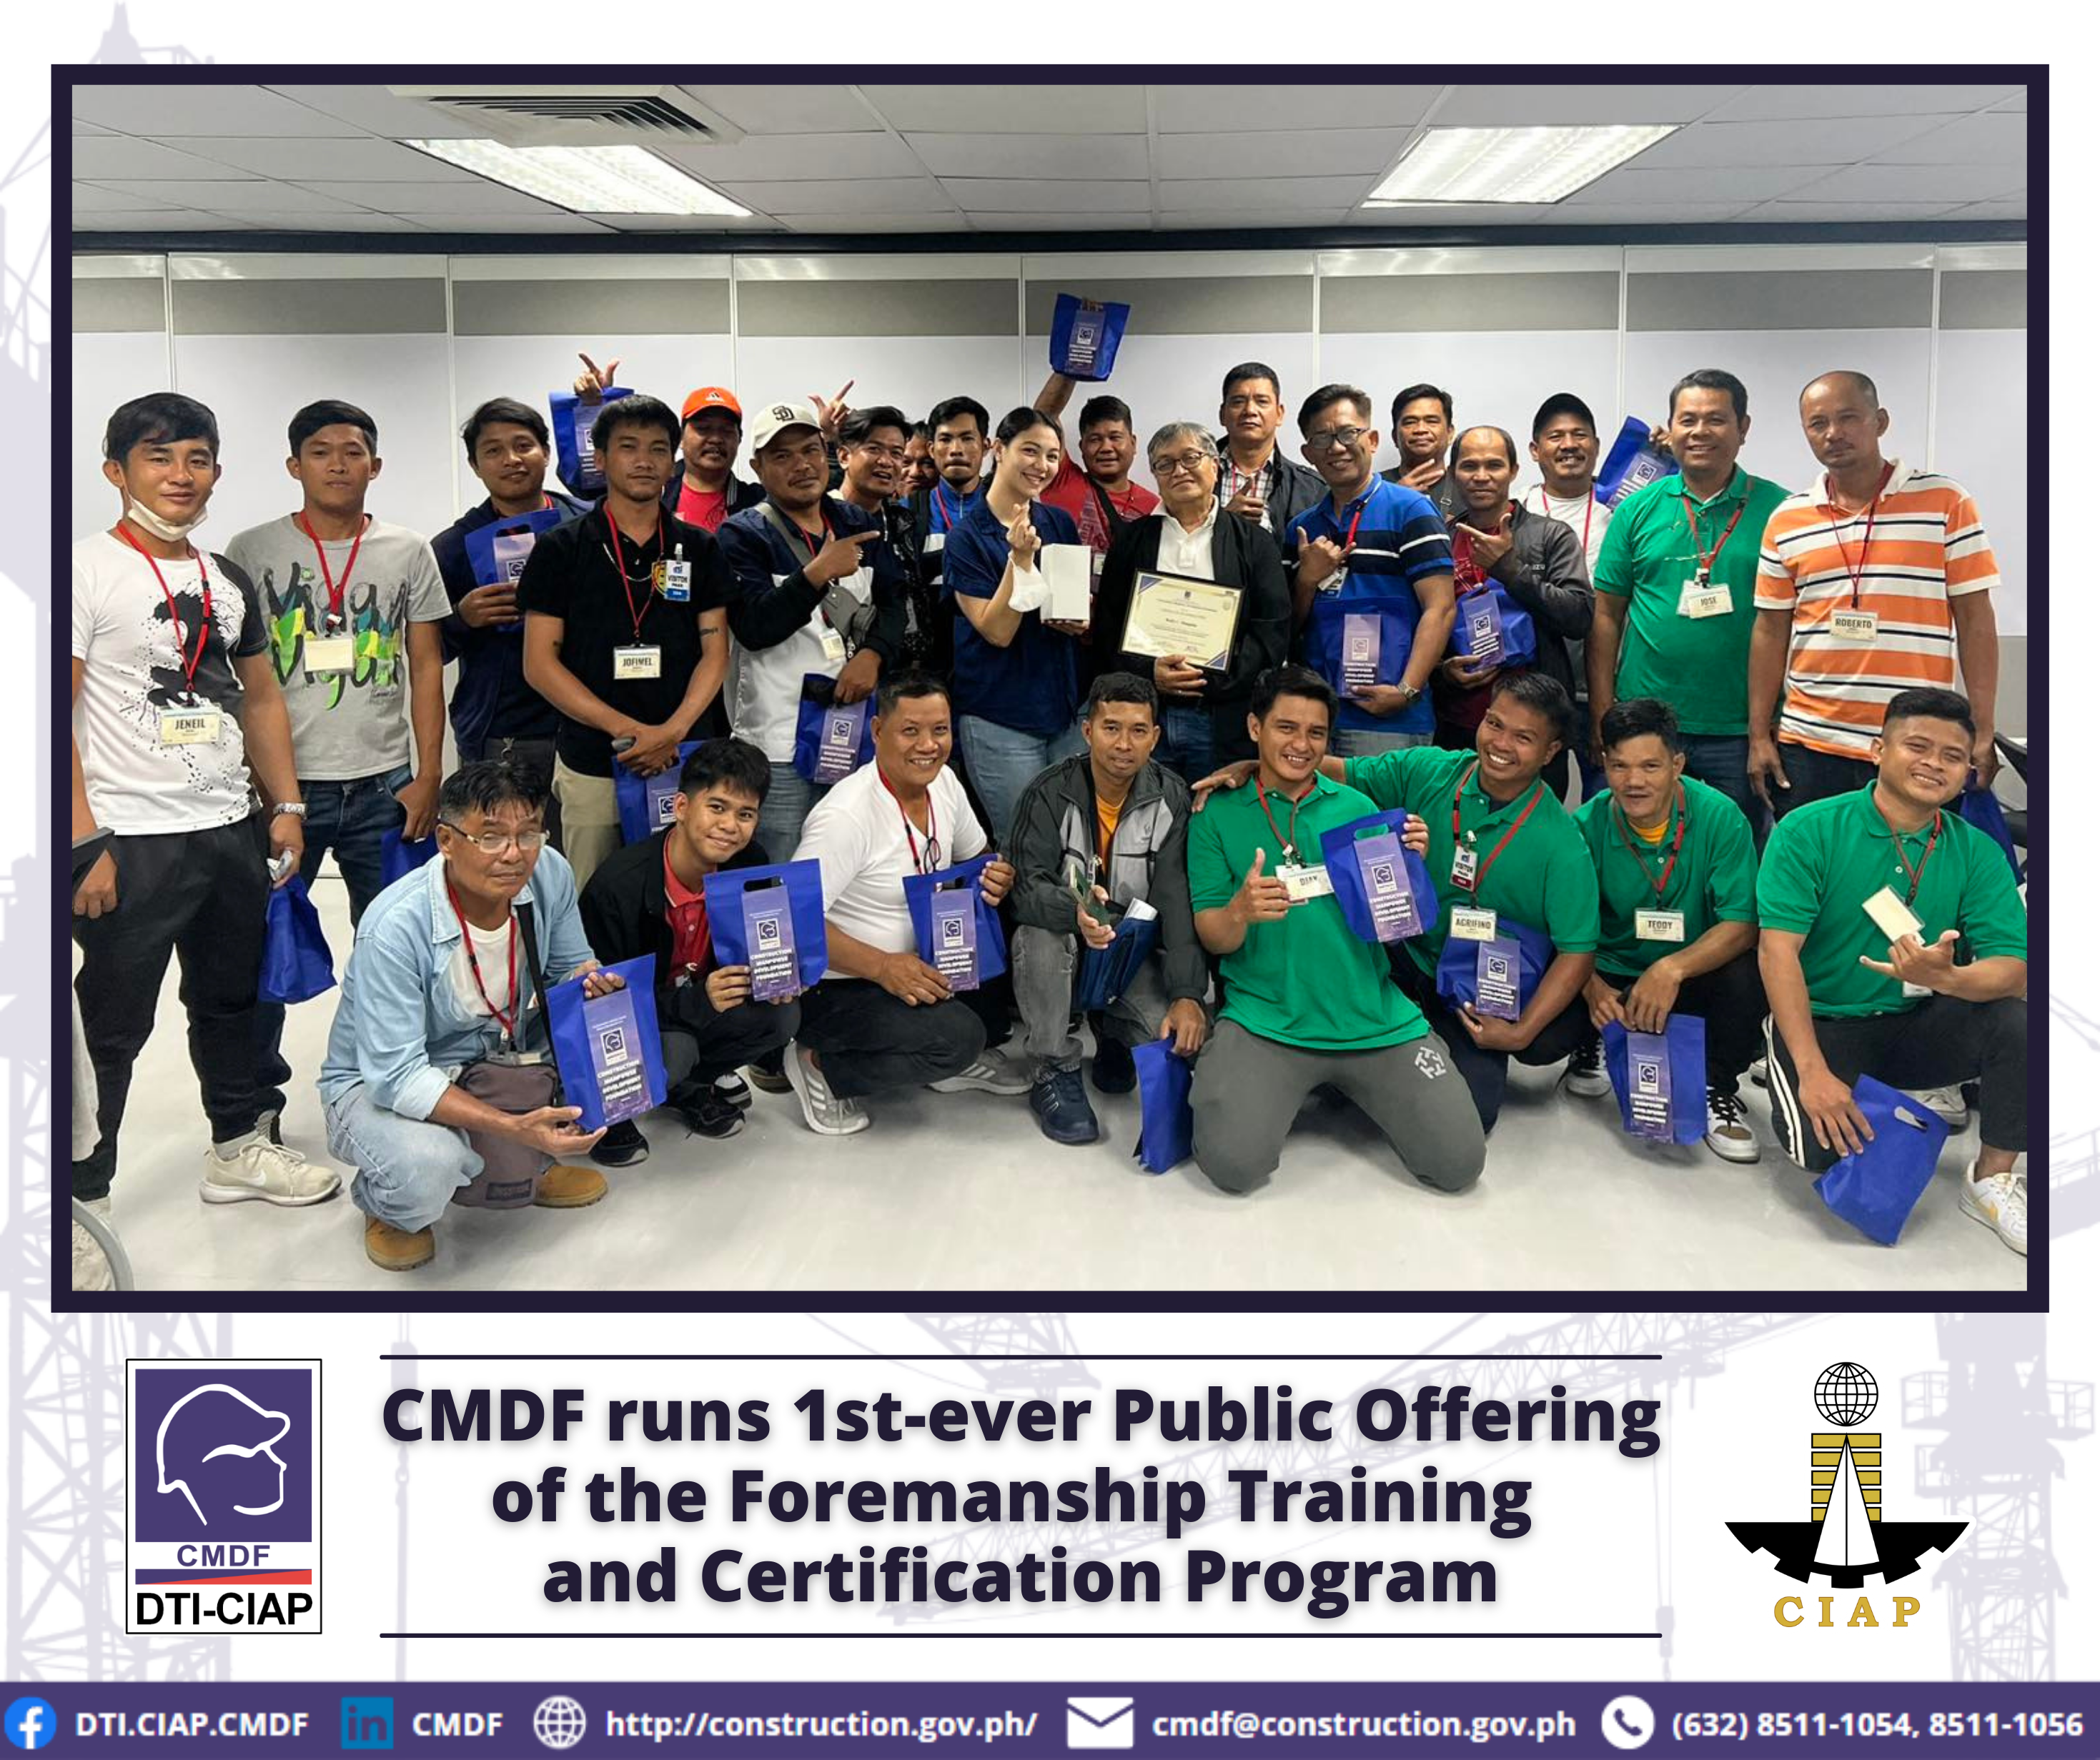 CMDF runs 1st Public Offering of the Foremanship Training and Certification Program